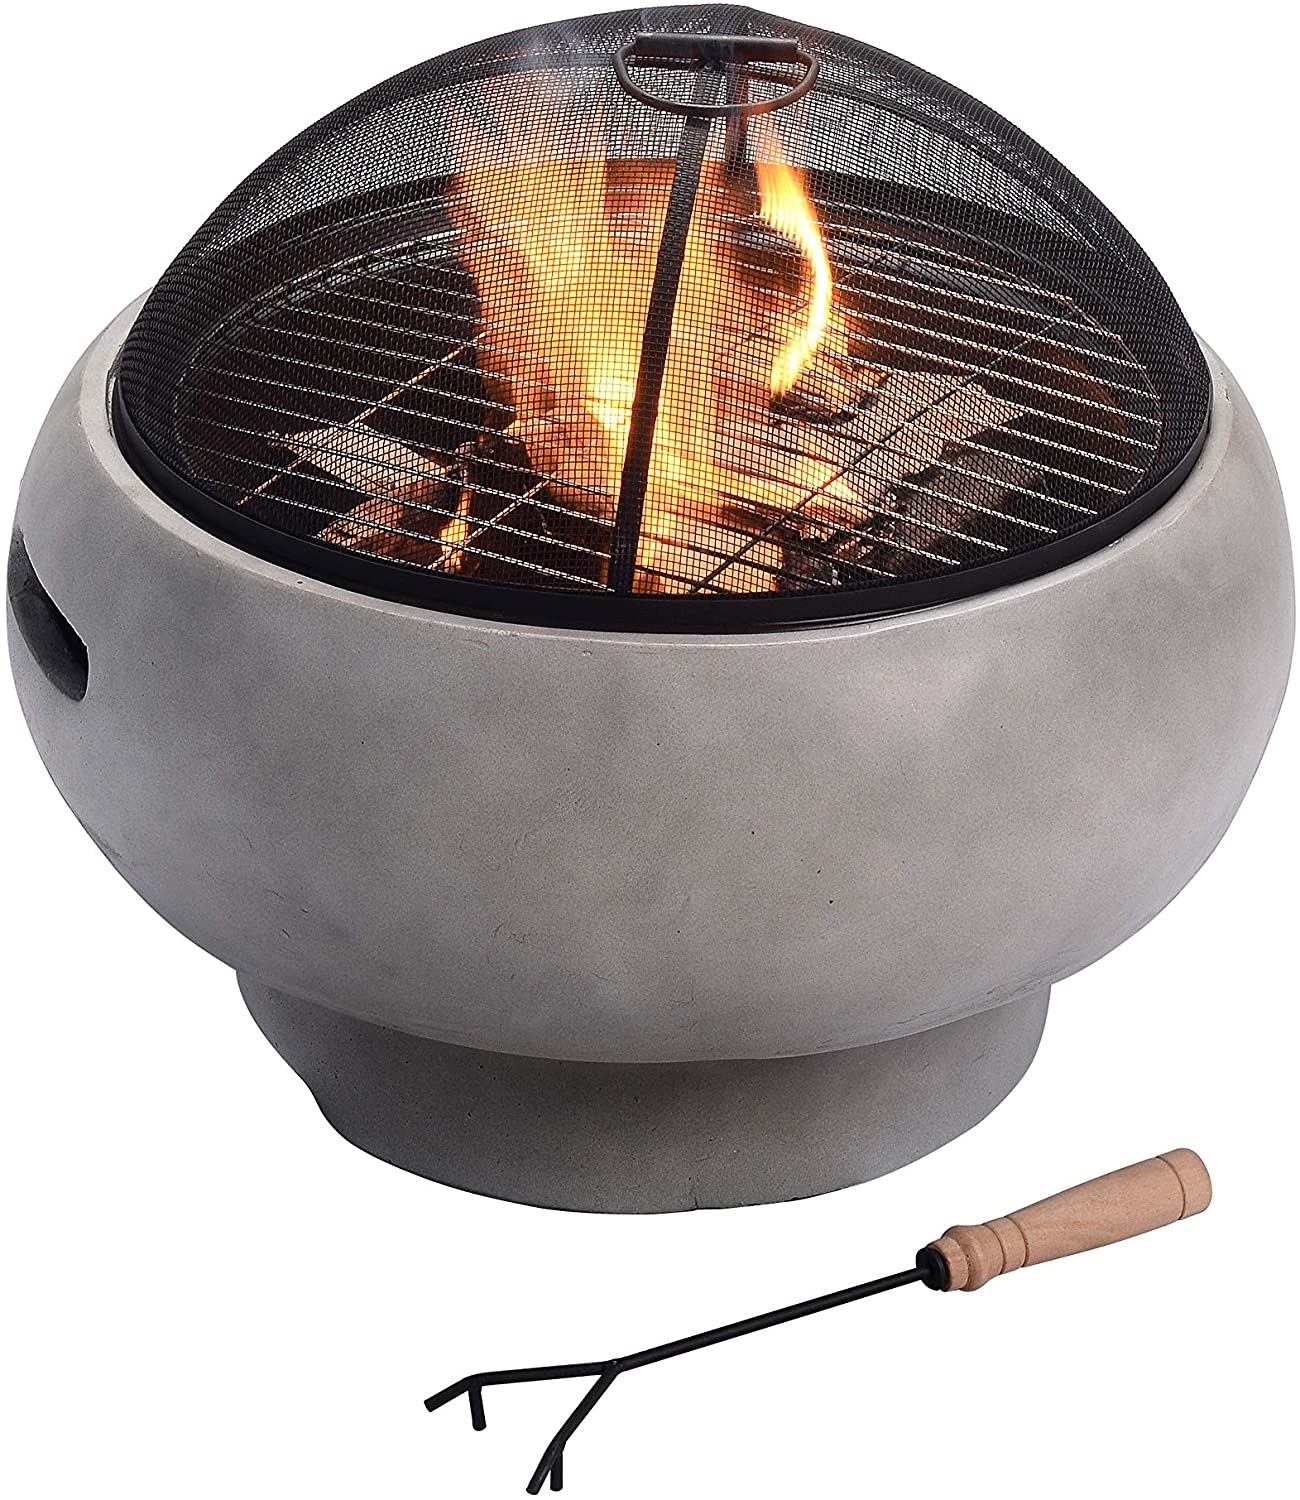 15 Best Amazon Fire Pits For Warm Weather